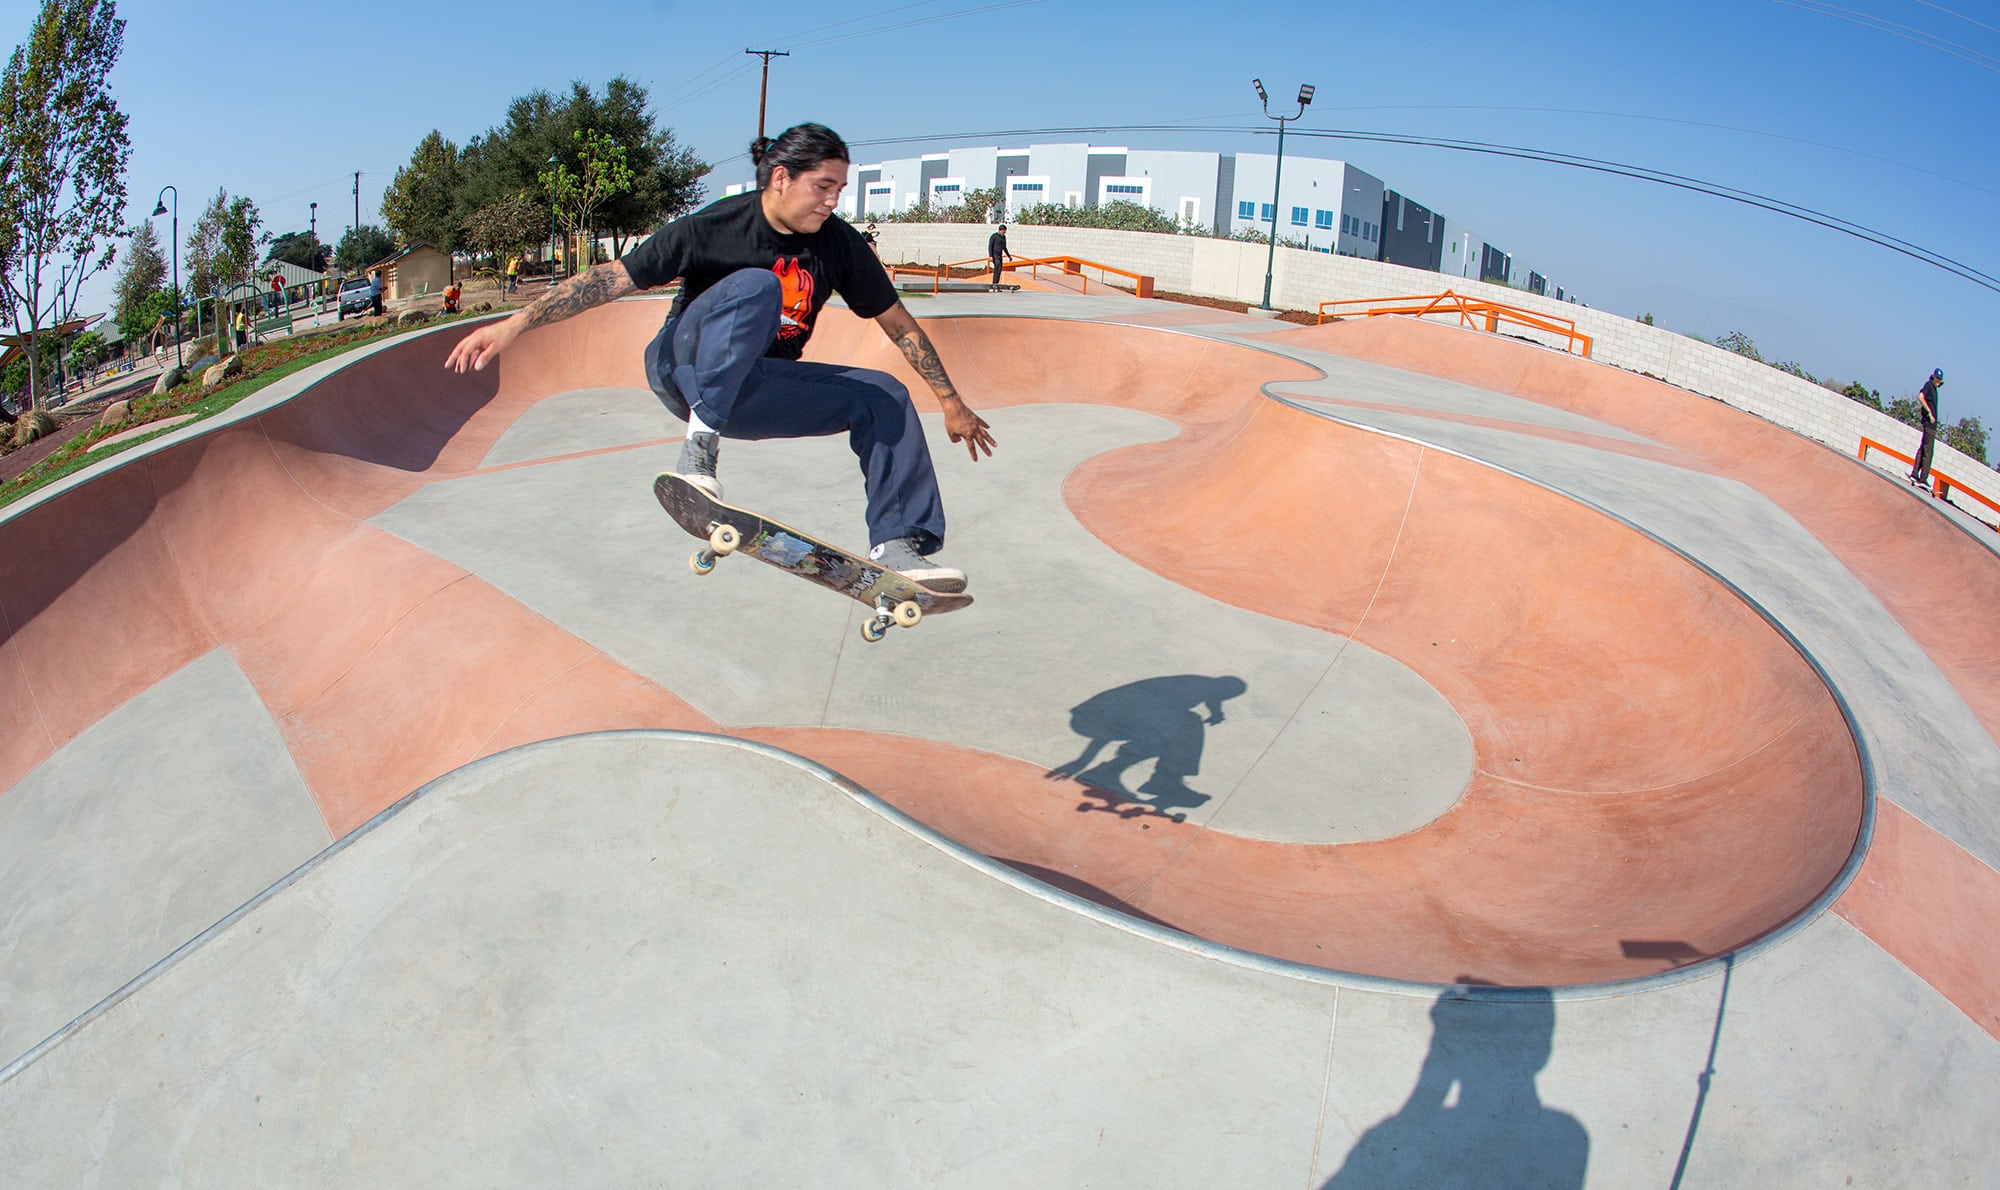 frontside ollie at the corner in the Gibson Mariposa Skatepark in El Monte, CA Butterfly bowl